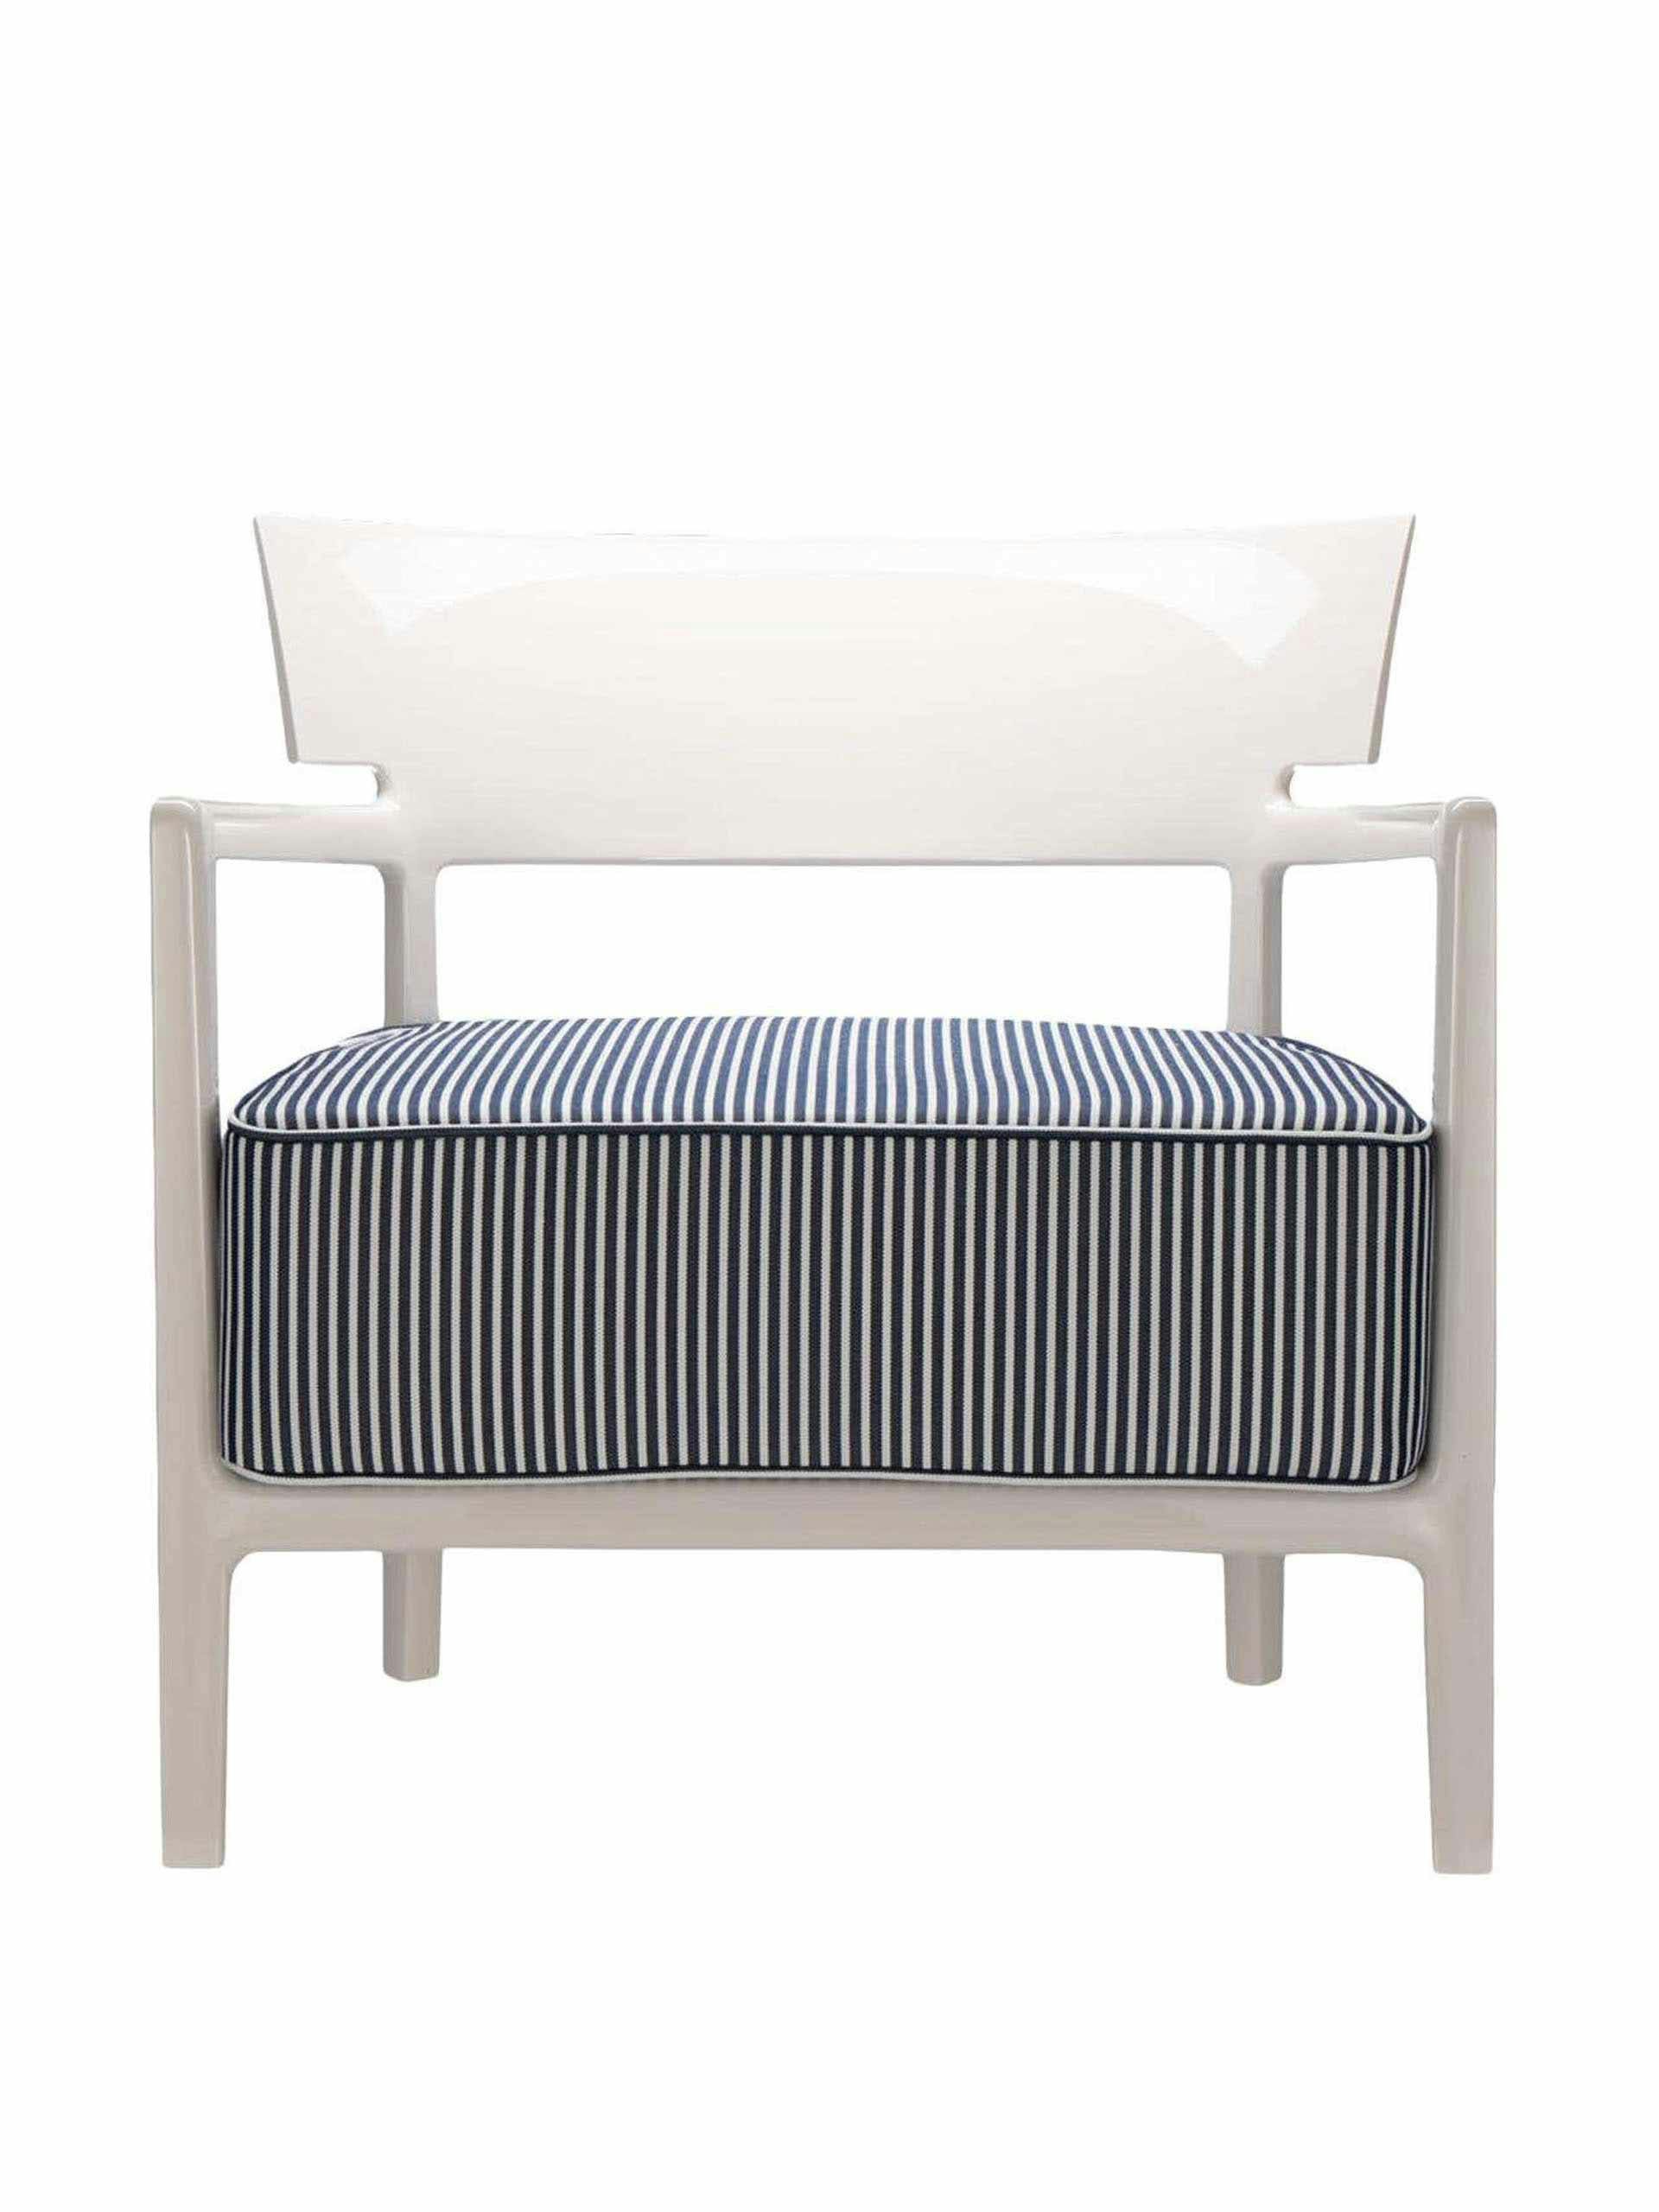 Outdoor chair in ivory blue